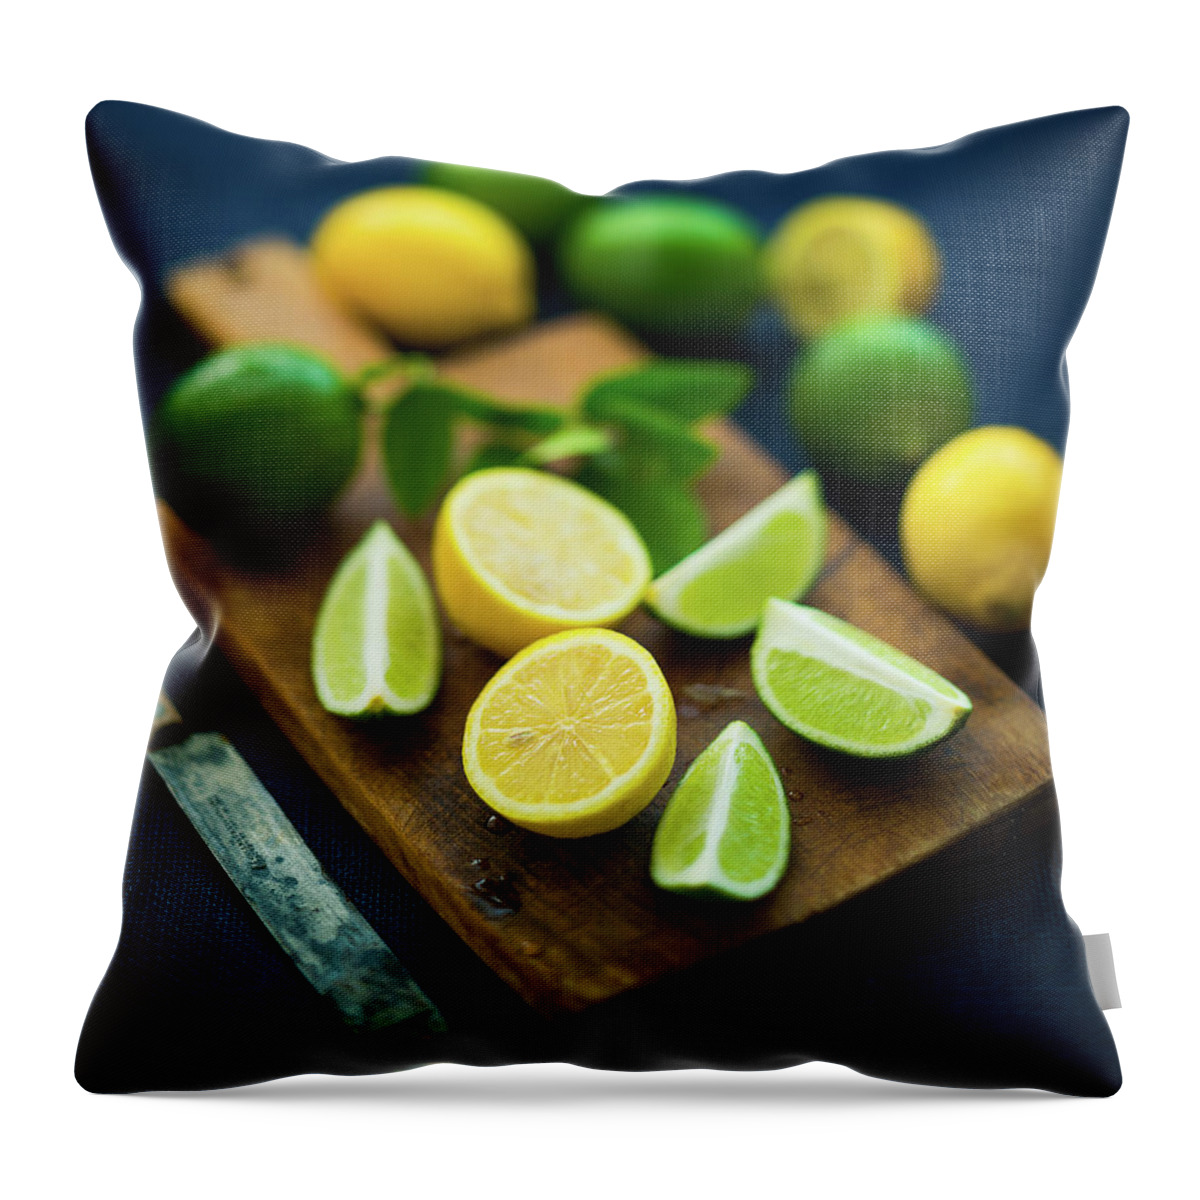 Orange Color Throw Pillow featuring the photograph Lemons And Limes by Thepalmer